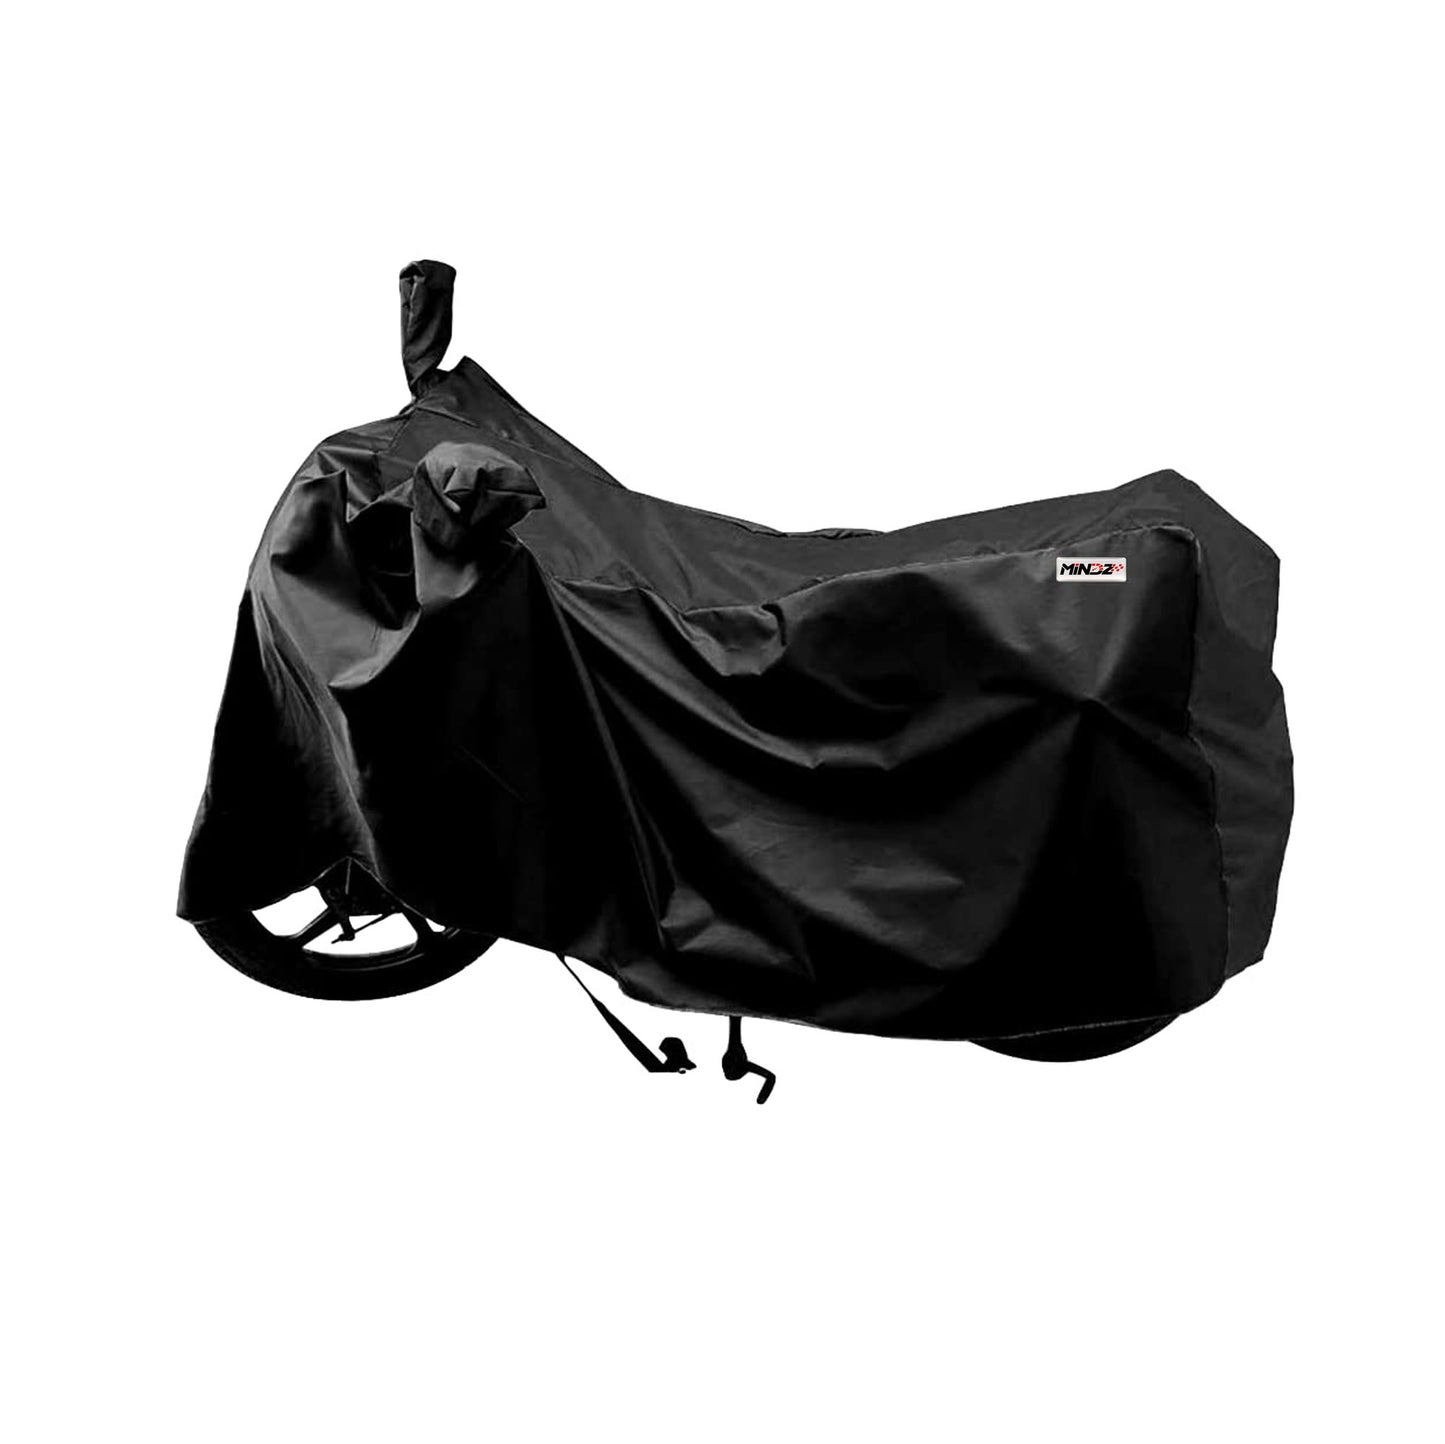 BODY COVER FOR RAY ZR 125